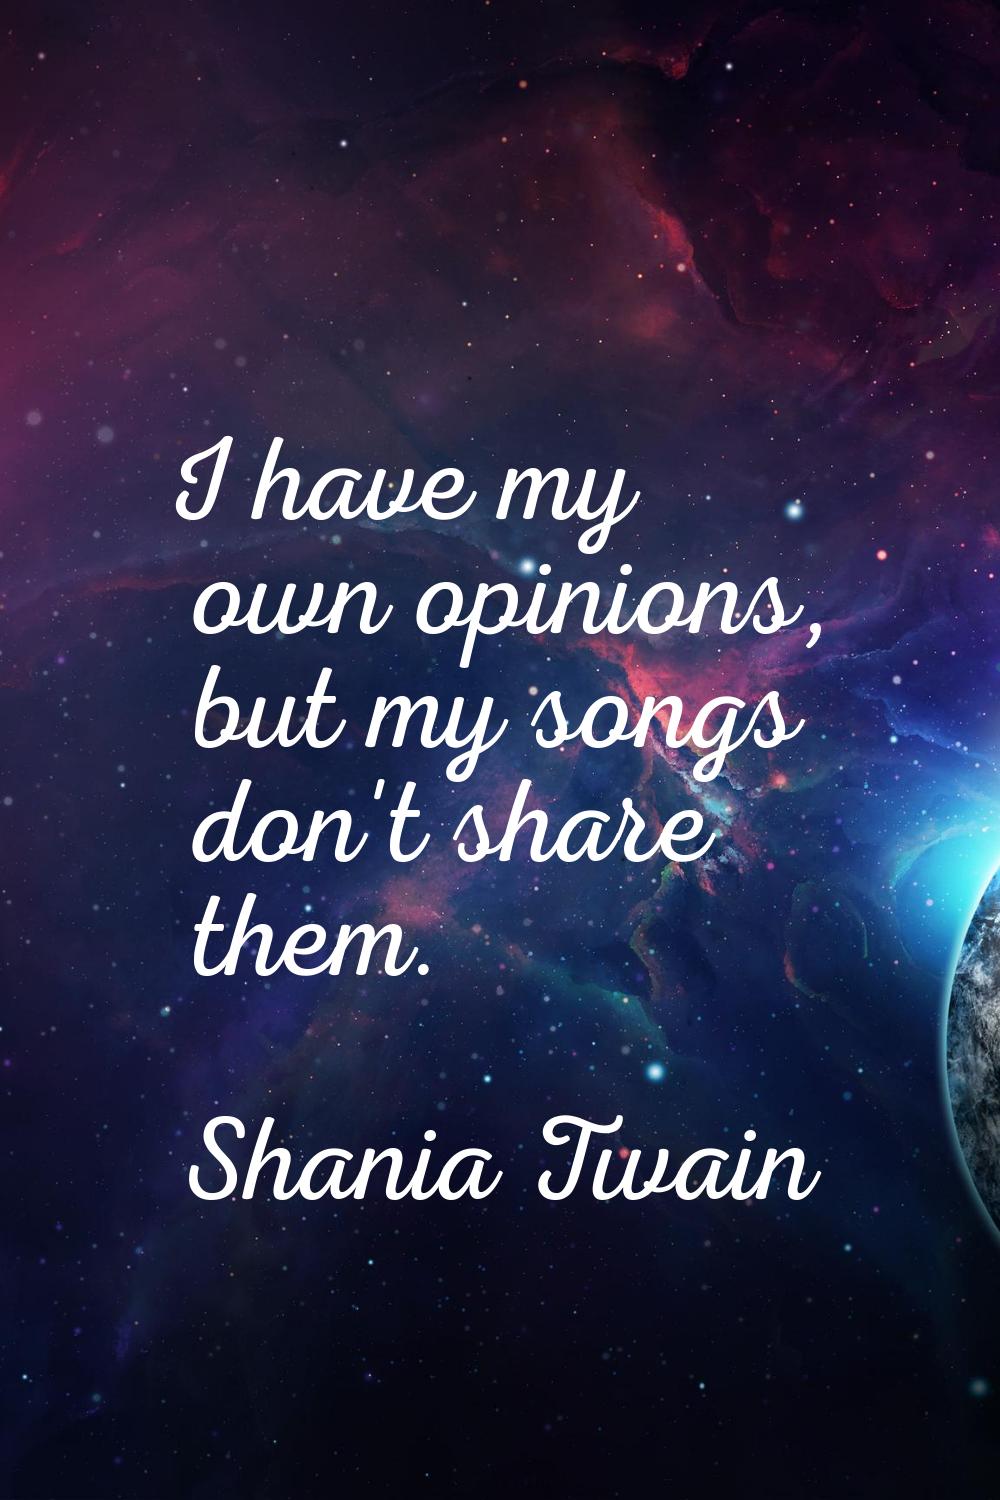 I have my own opinions, but my songs don't share them.